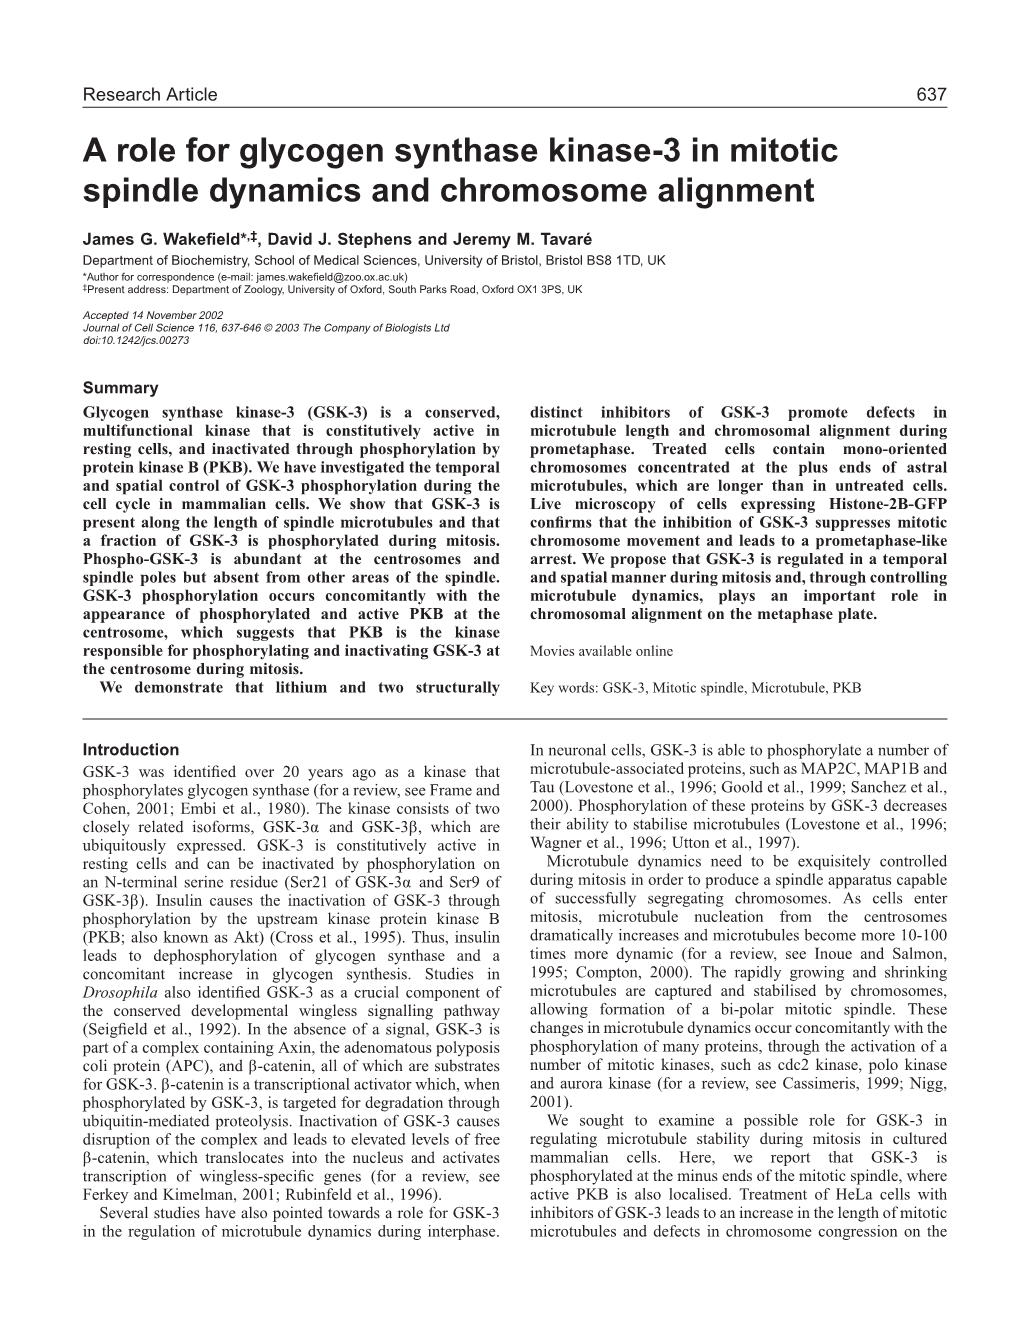 A Role for Glycogen Synthase Kinase-3 in Mitotic Spindle Dynamics and Chromosome Alignment